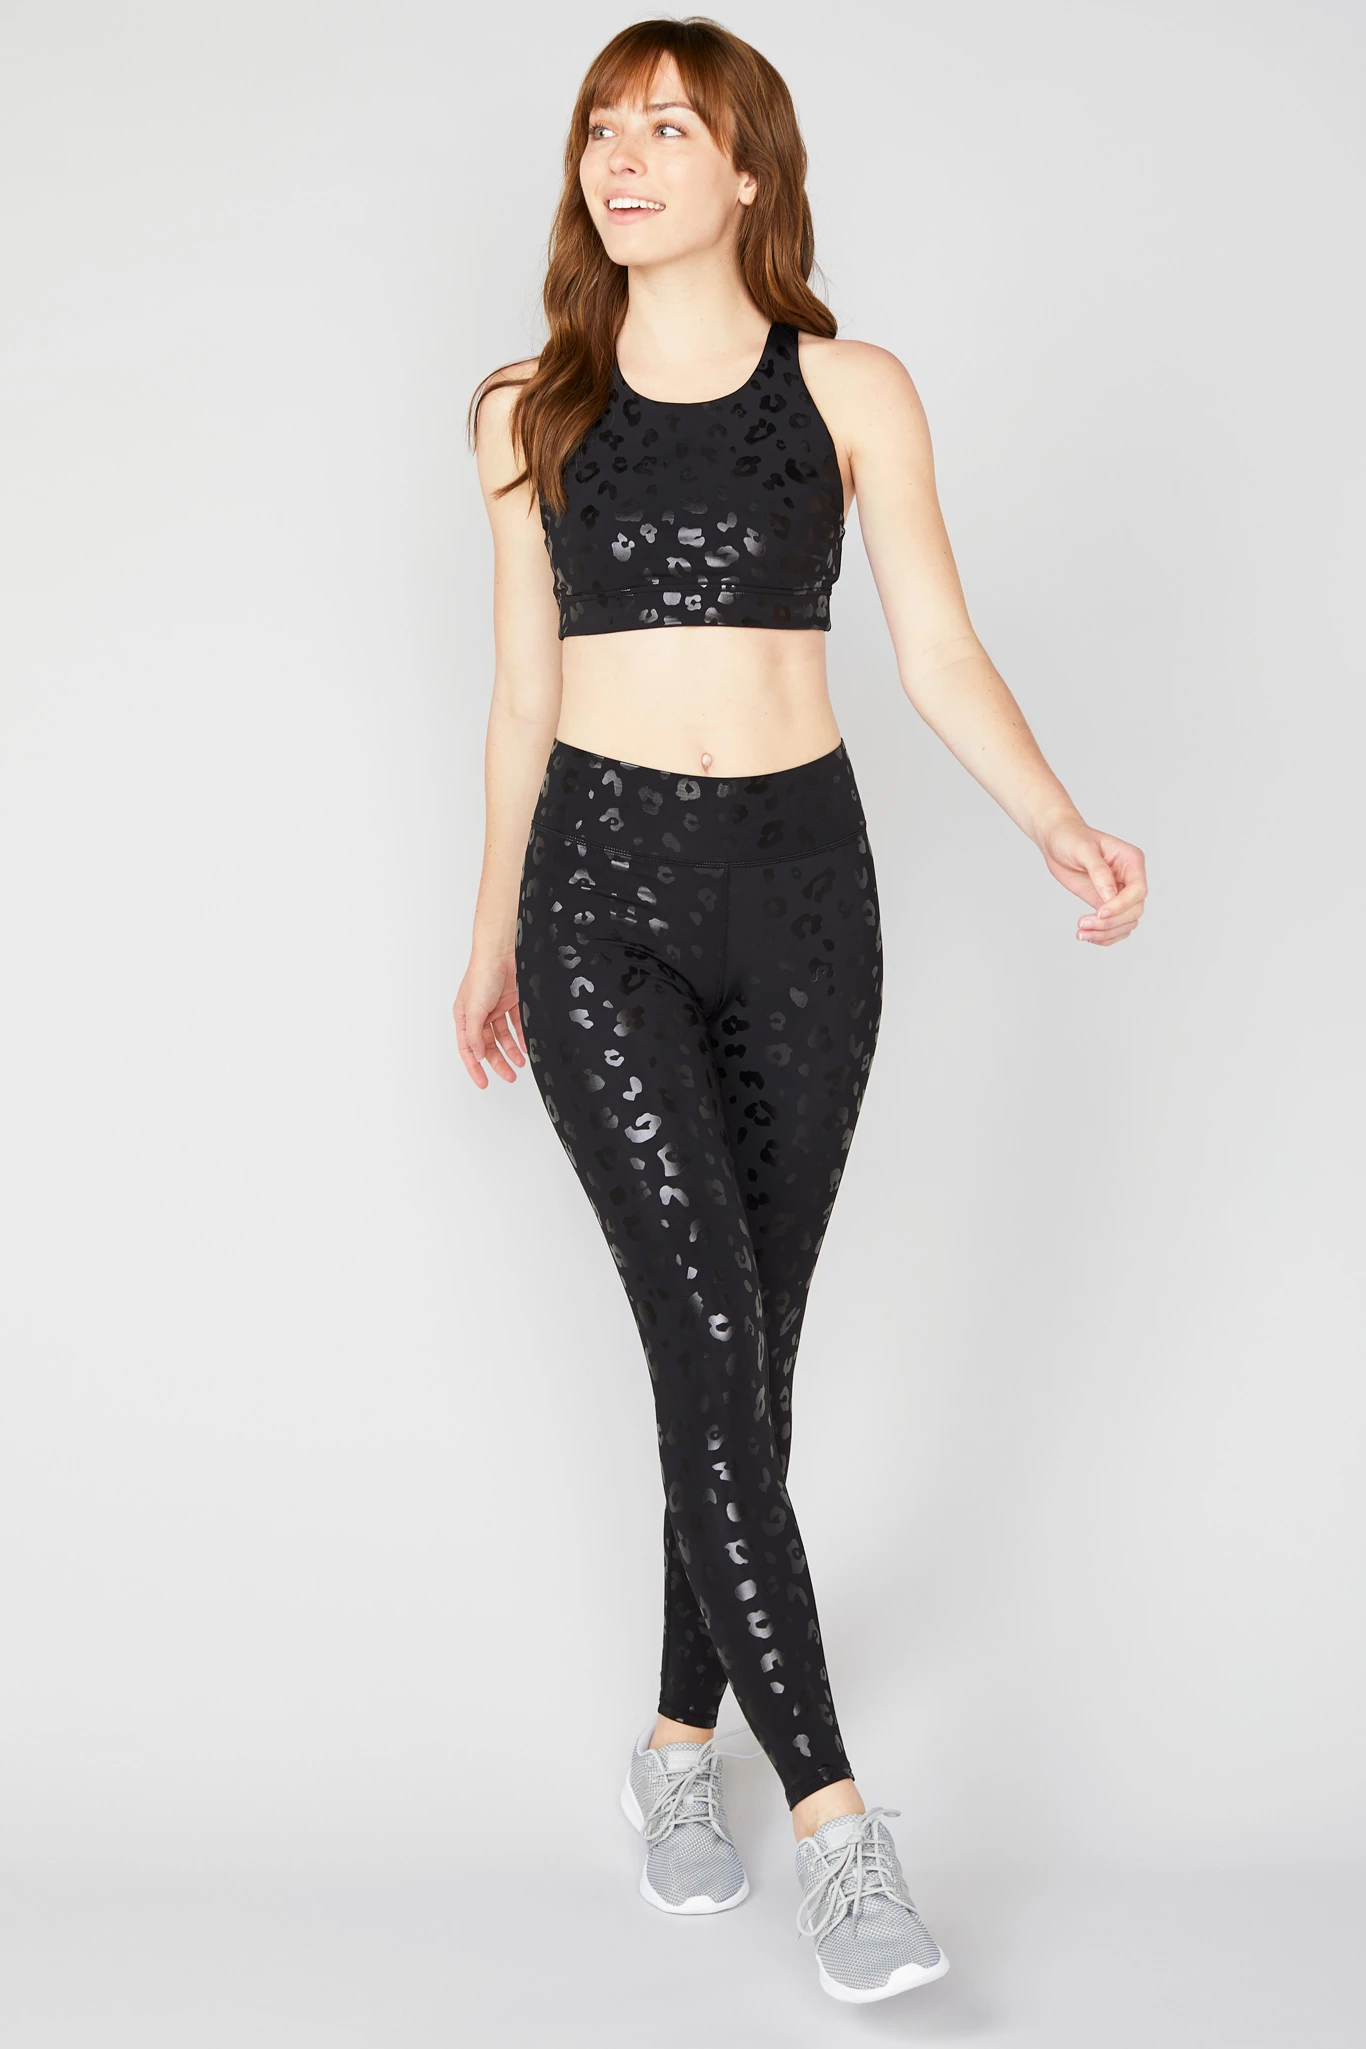 UpLift Leggings in Black Tonal Star Foil with Tall Band –